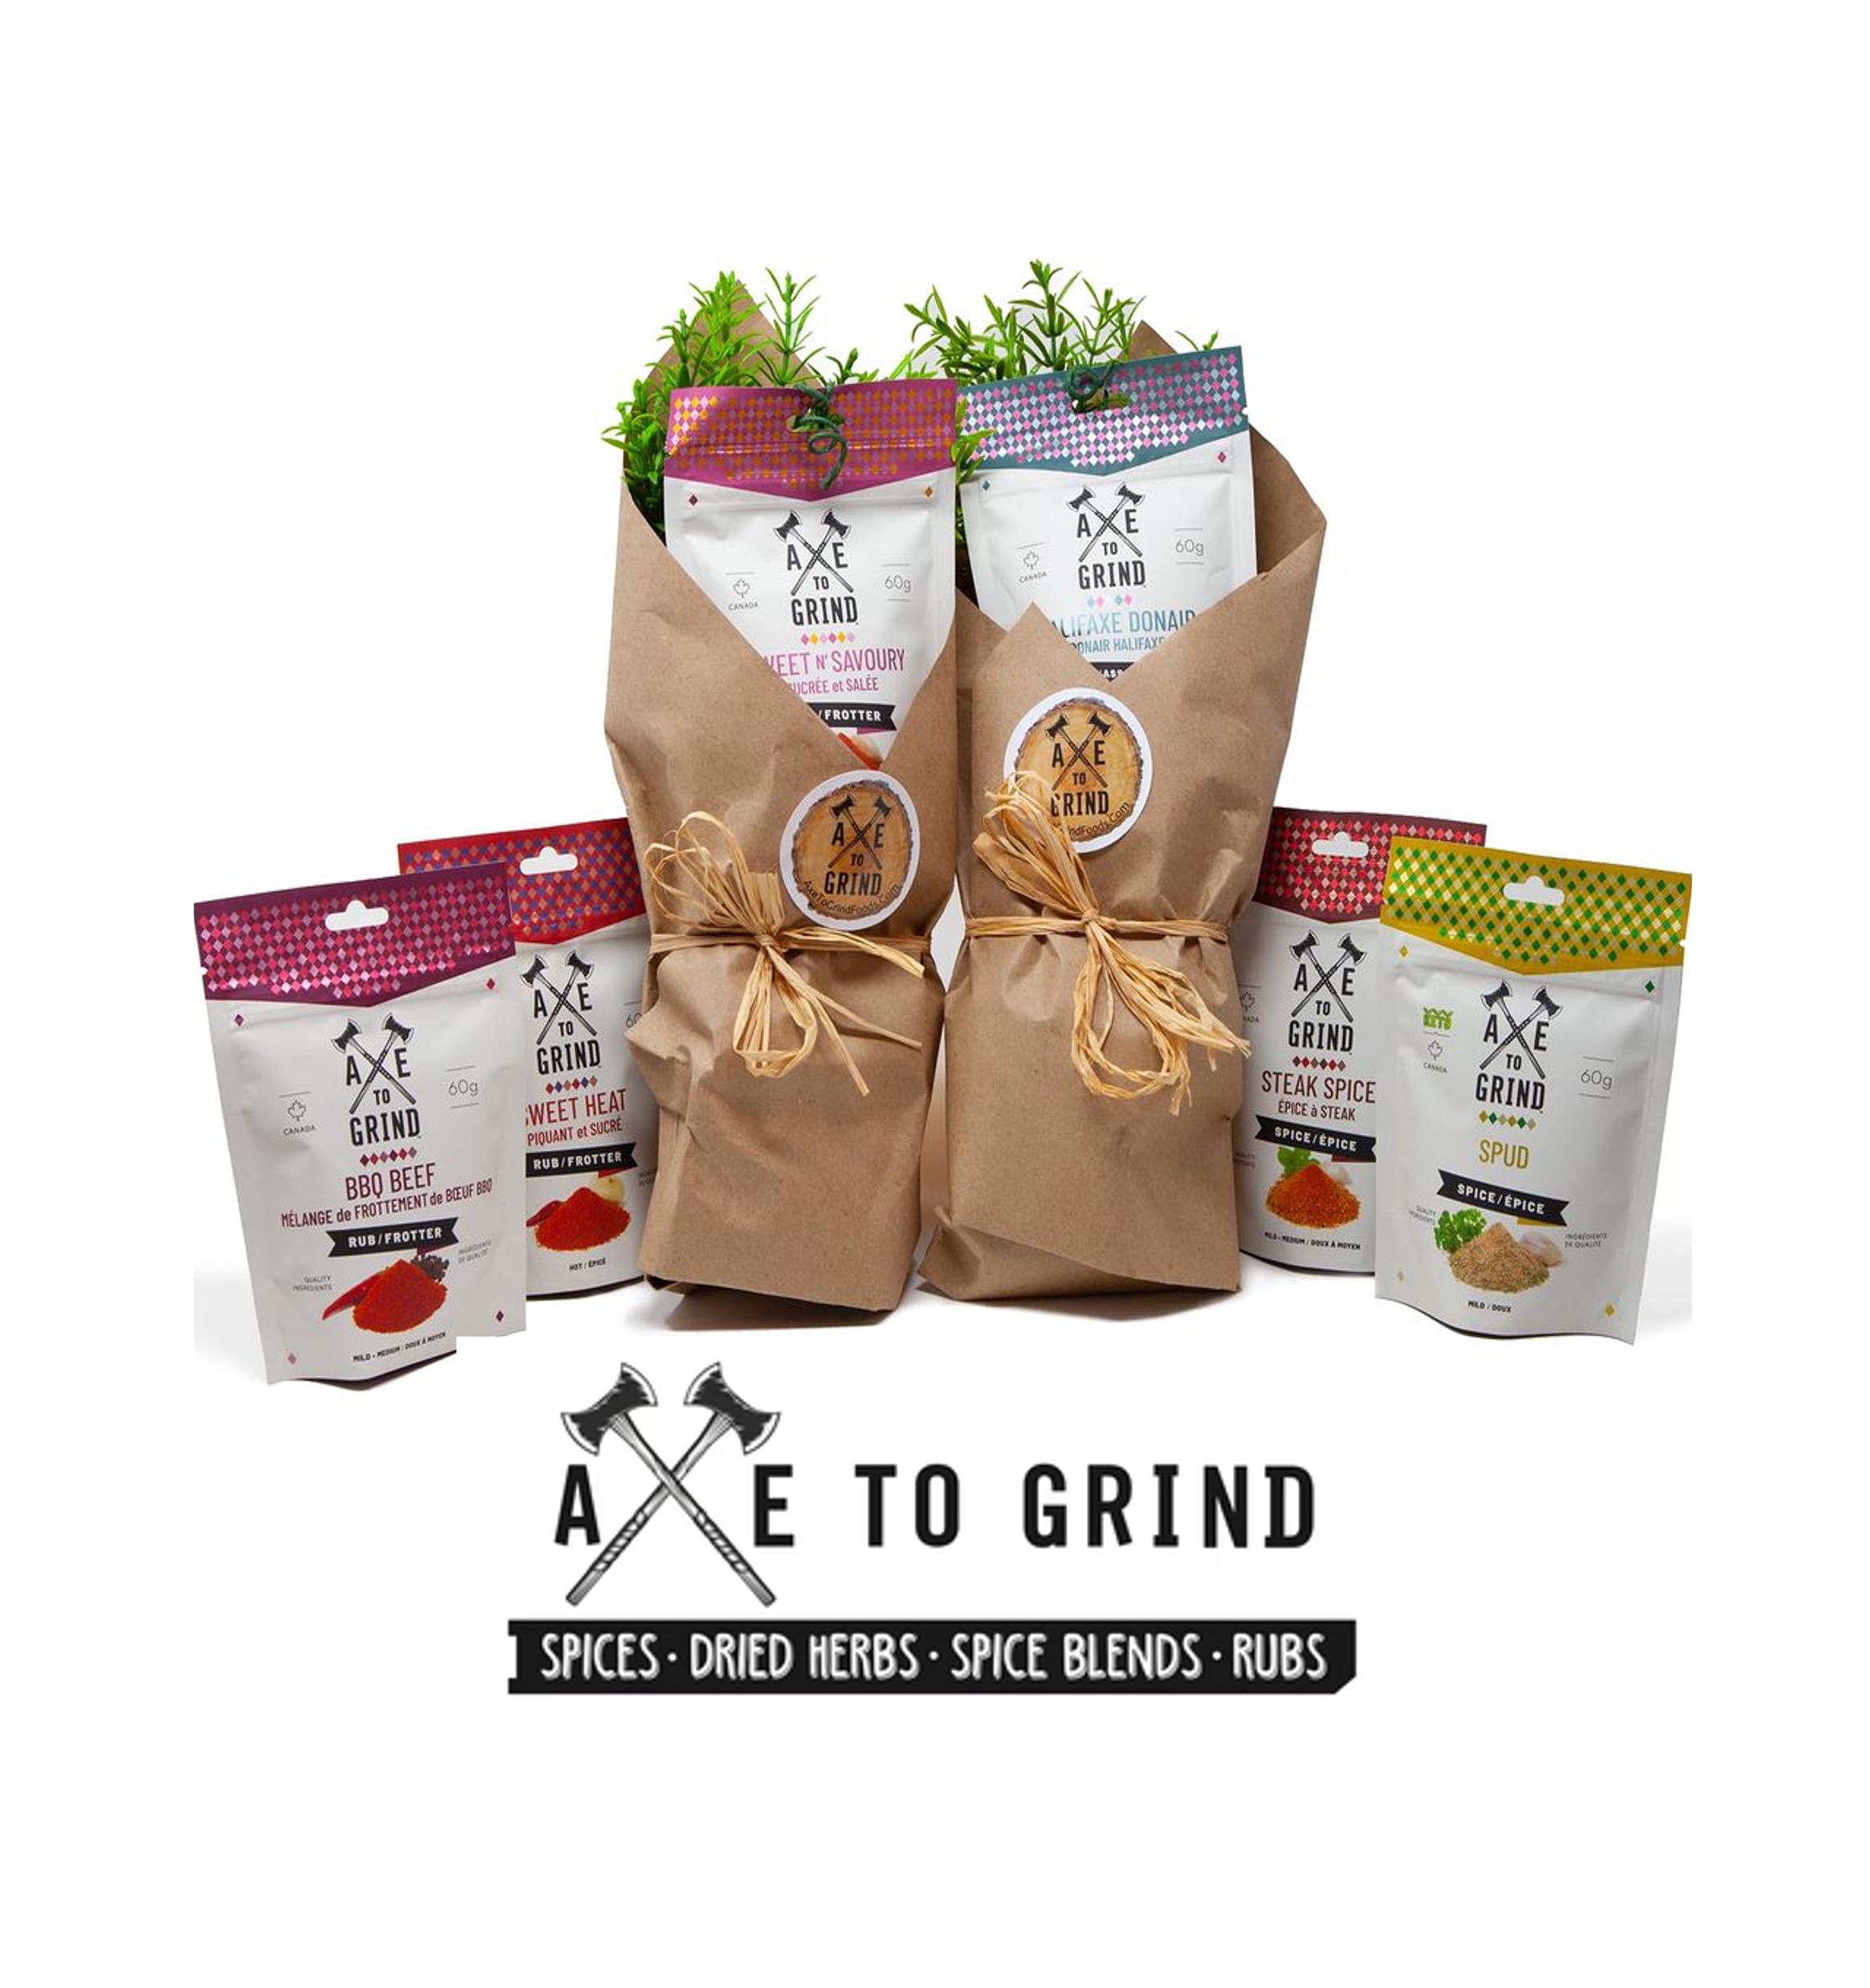 Spice Blend Products wrapped up like bouquets in kraft paper. vStore Main image Axe to Grind Foods spice blends